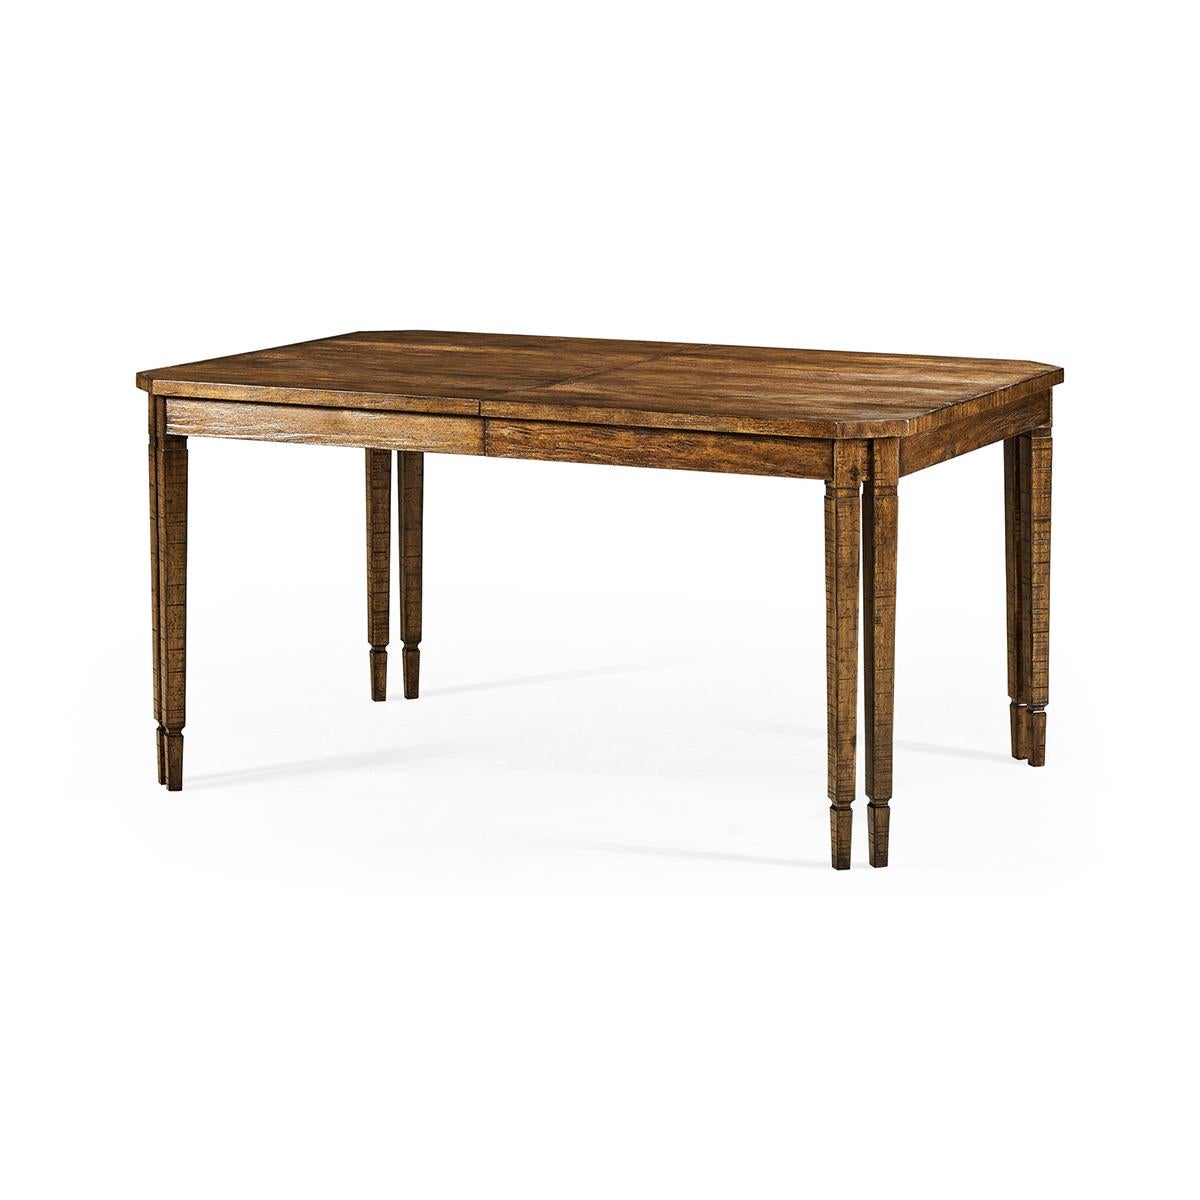 Rustic country walnut extension dining table, the rectangular extending dining table has a rough saw mark casual finish, cut corners and is raised on double square tapered legs. 

Dimensions:
Open - 80